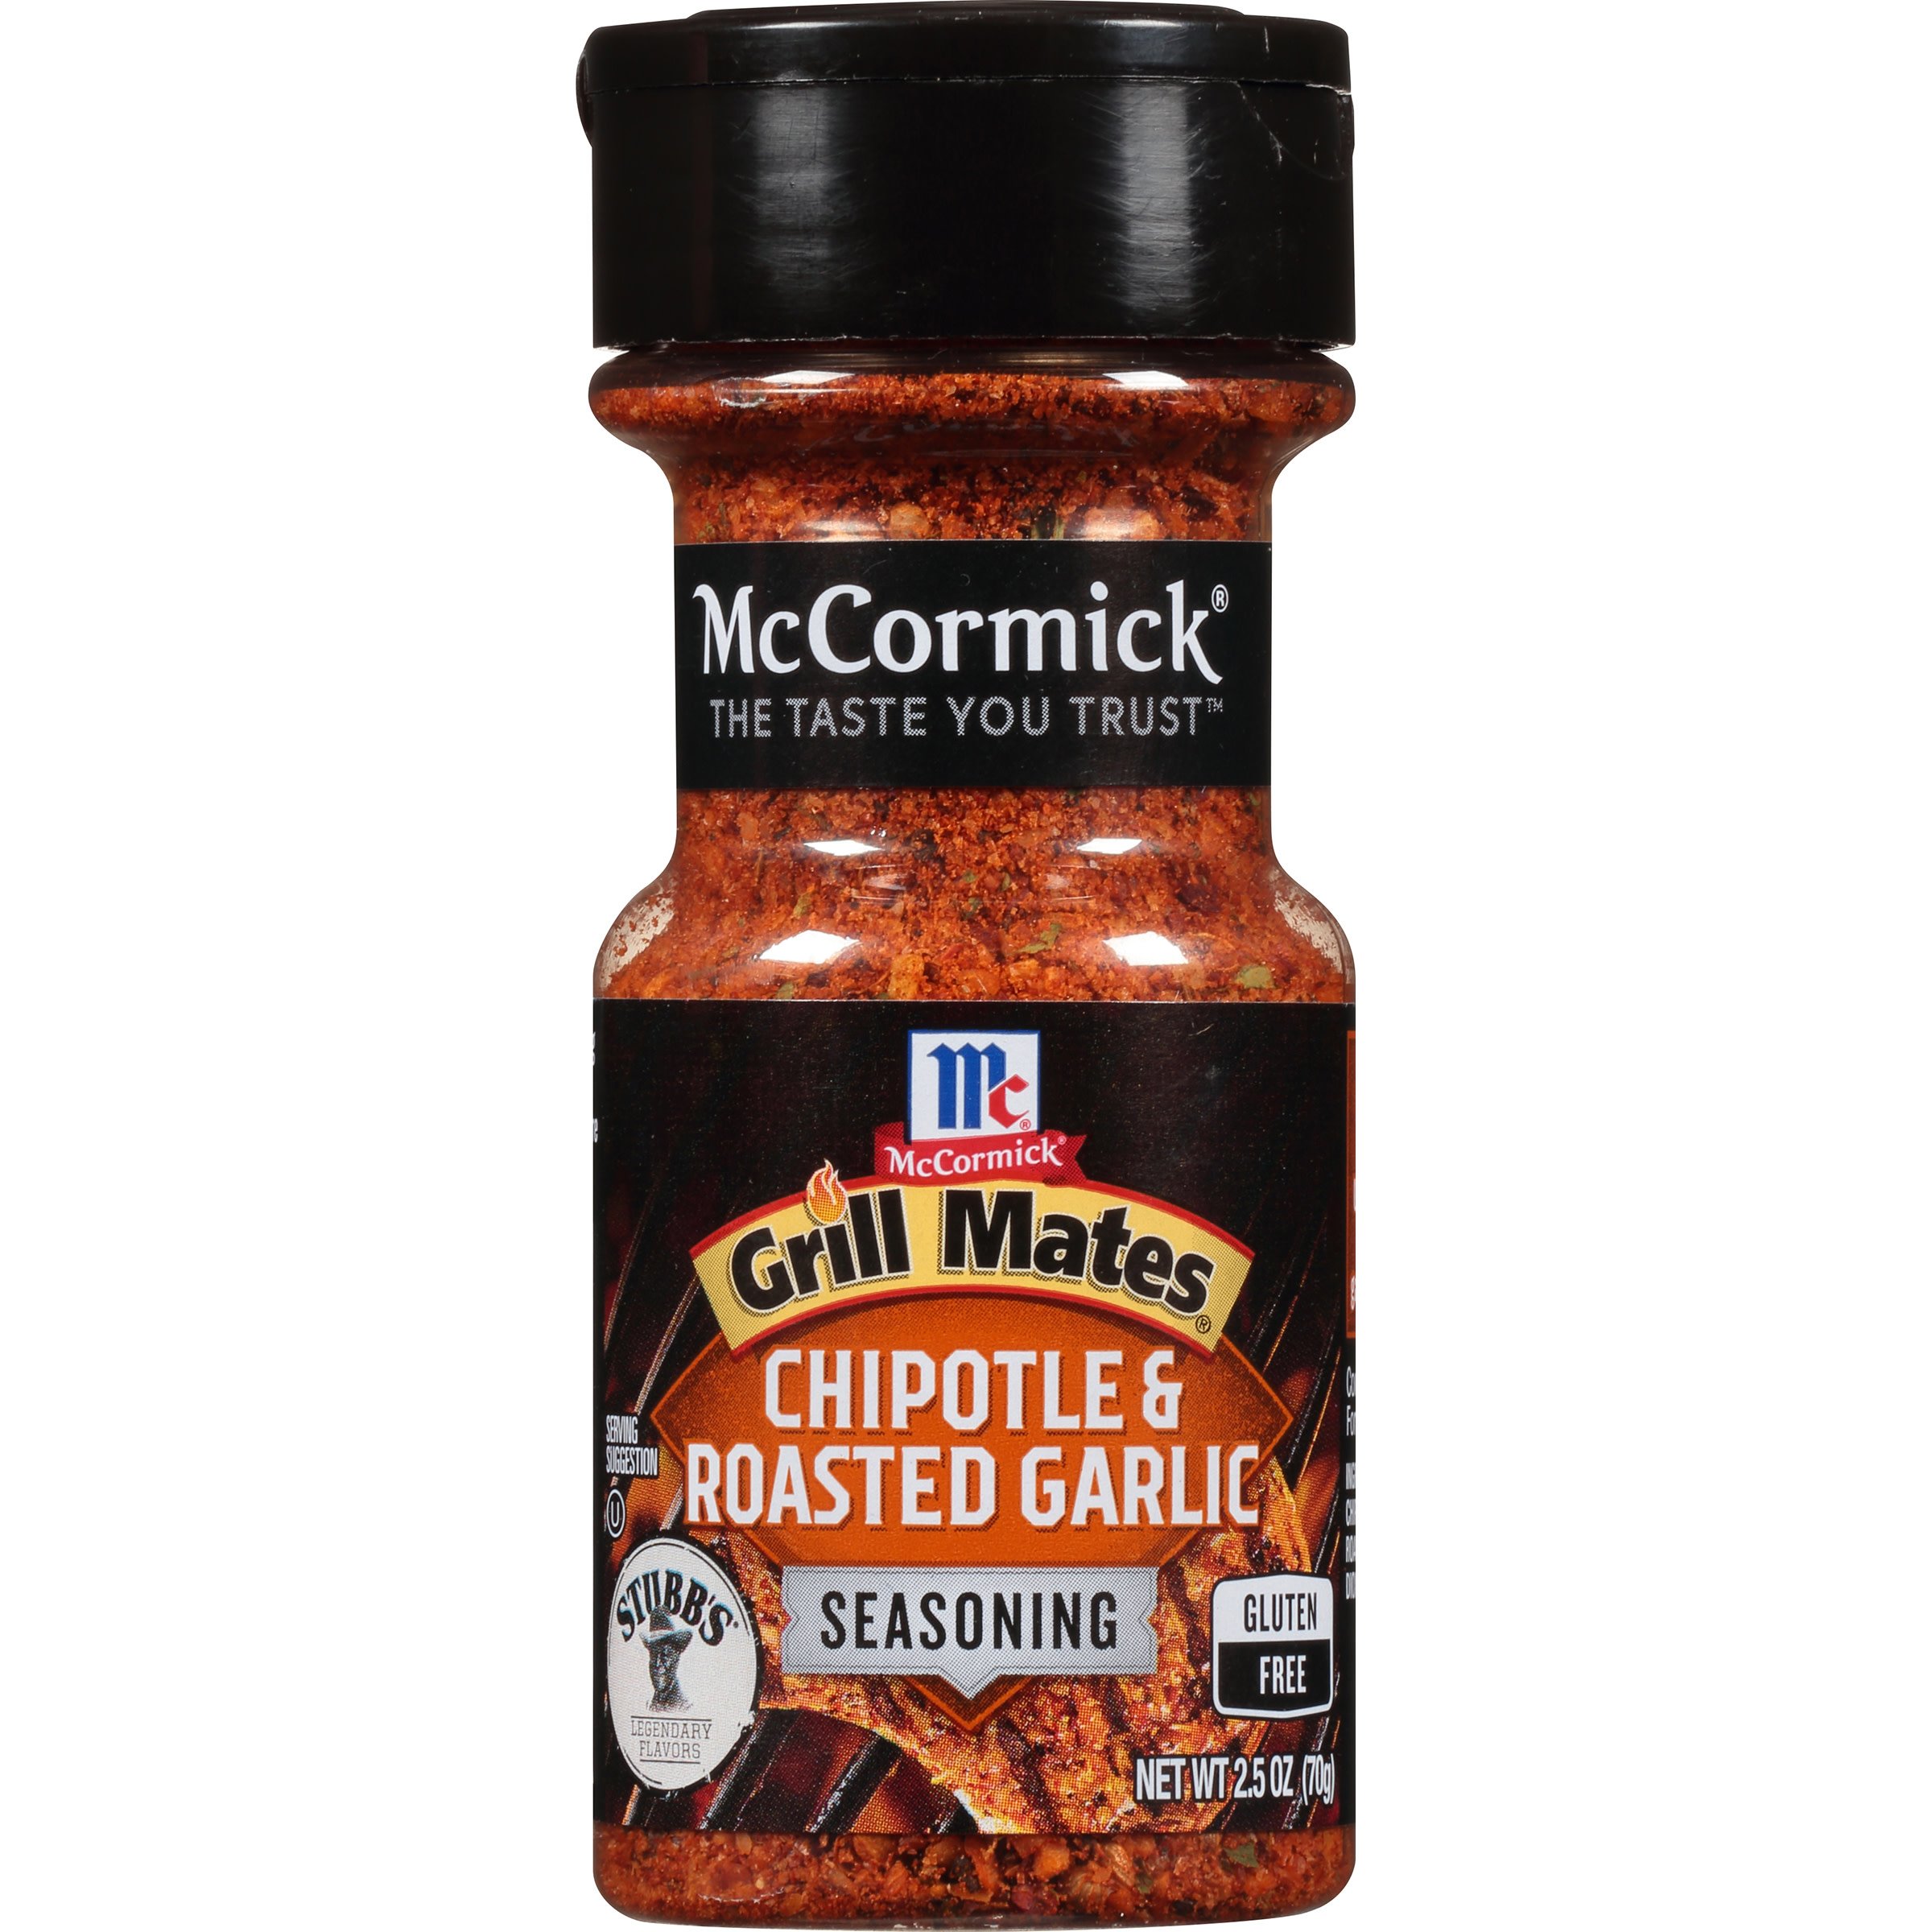 Mccormick Grill Mates Chipotle And Roasted Garlic Seasoning Shop Herbs And Spices At H E B